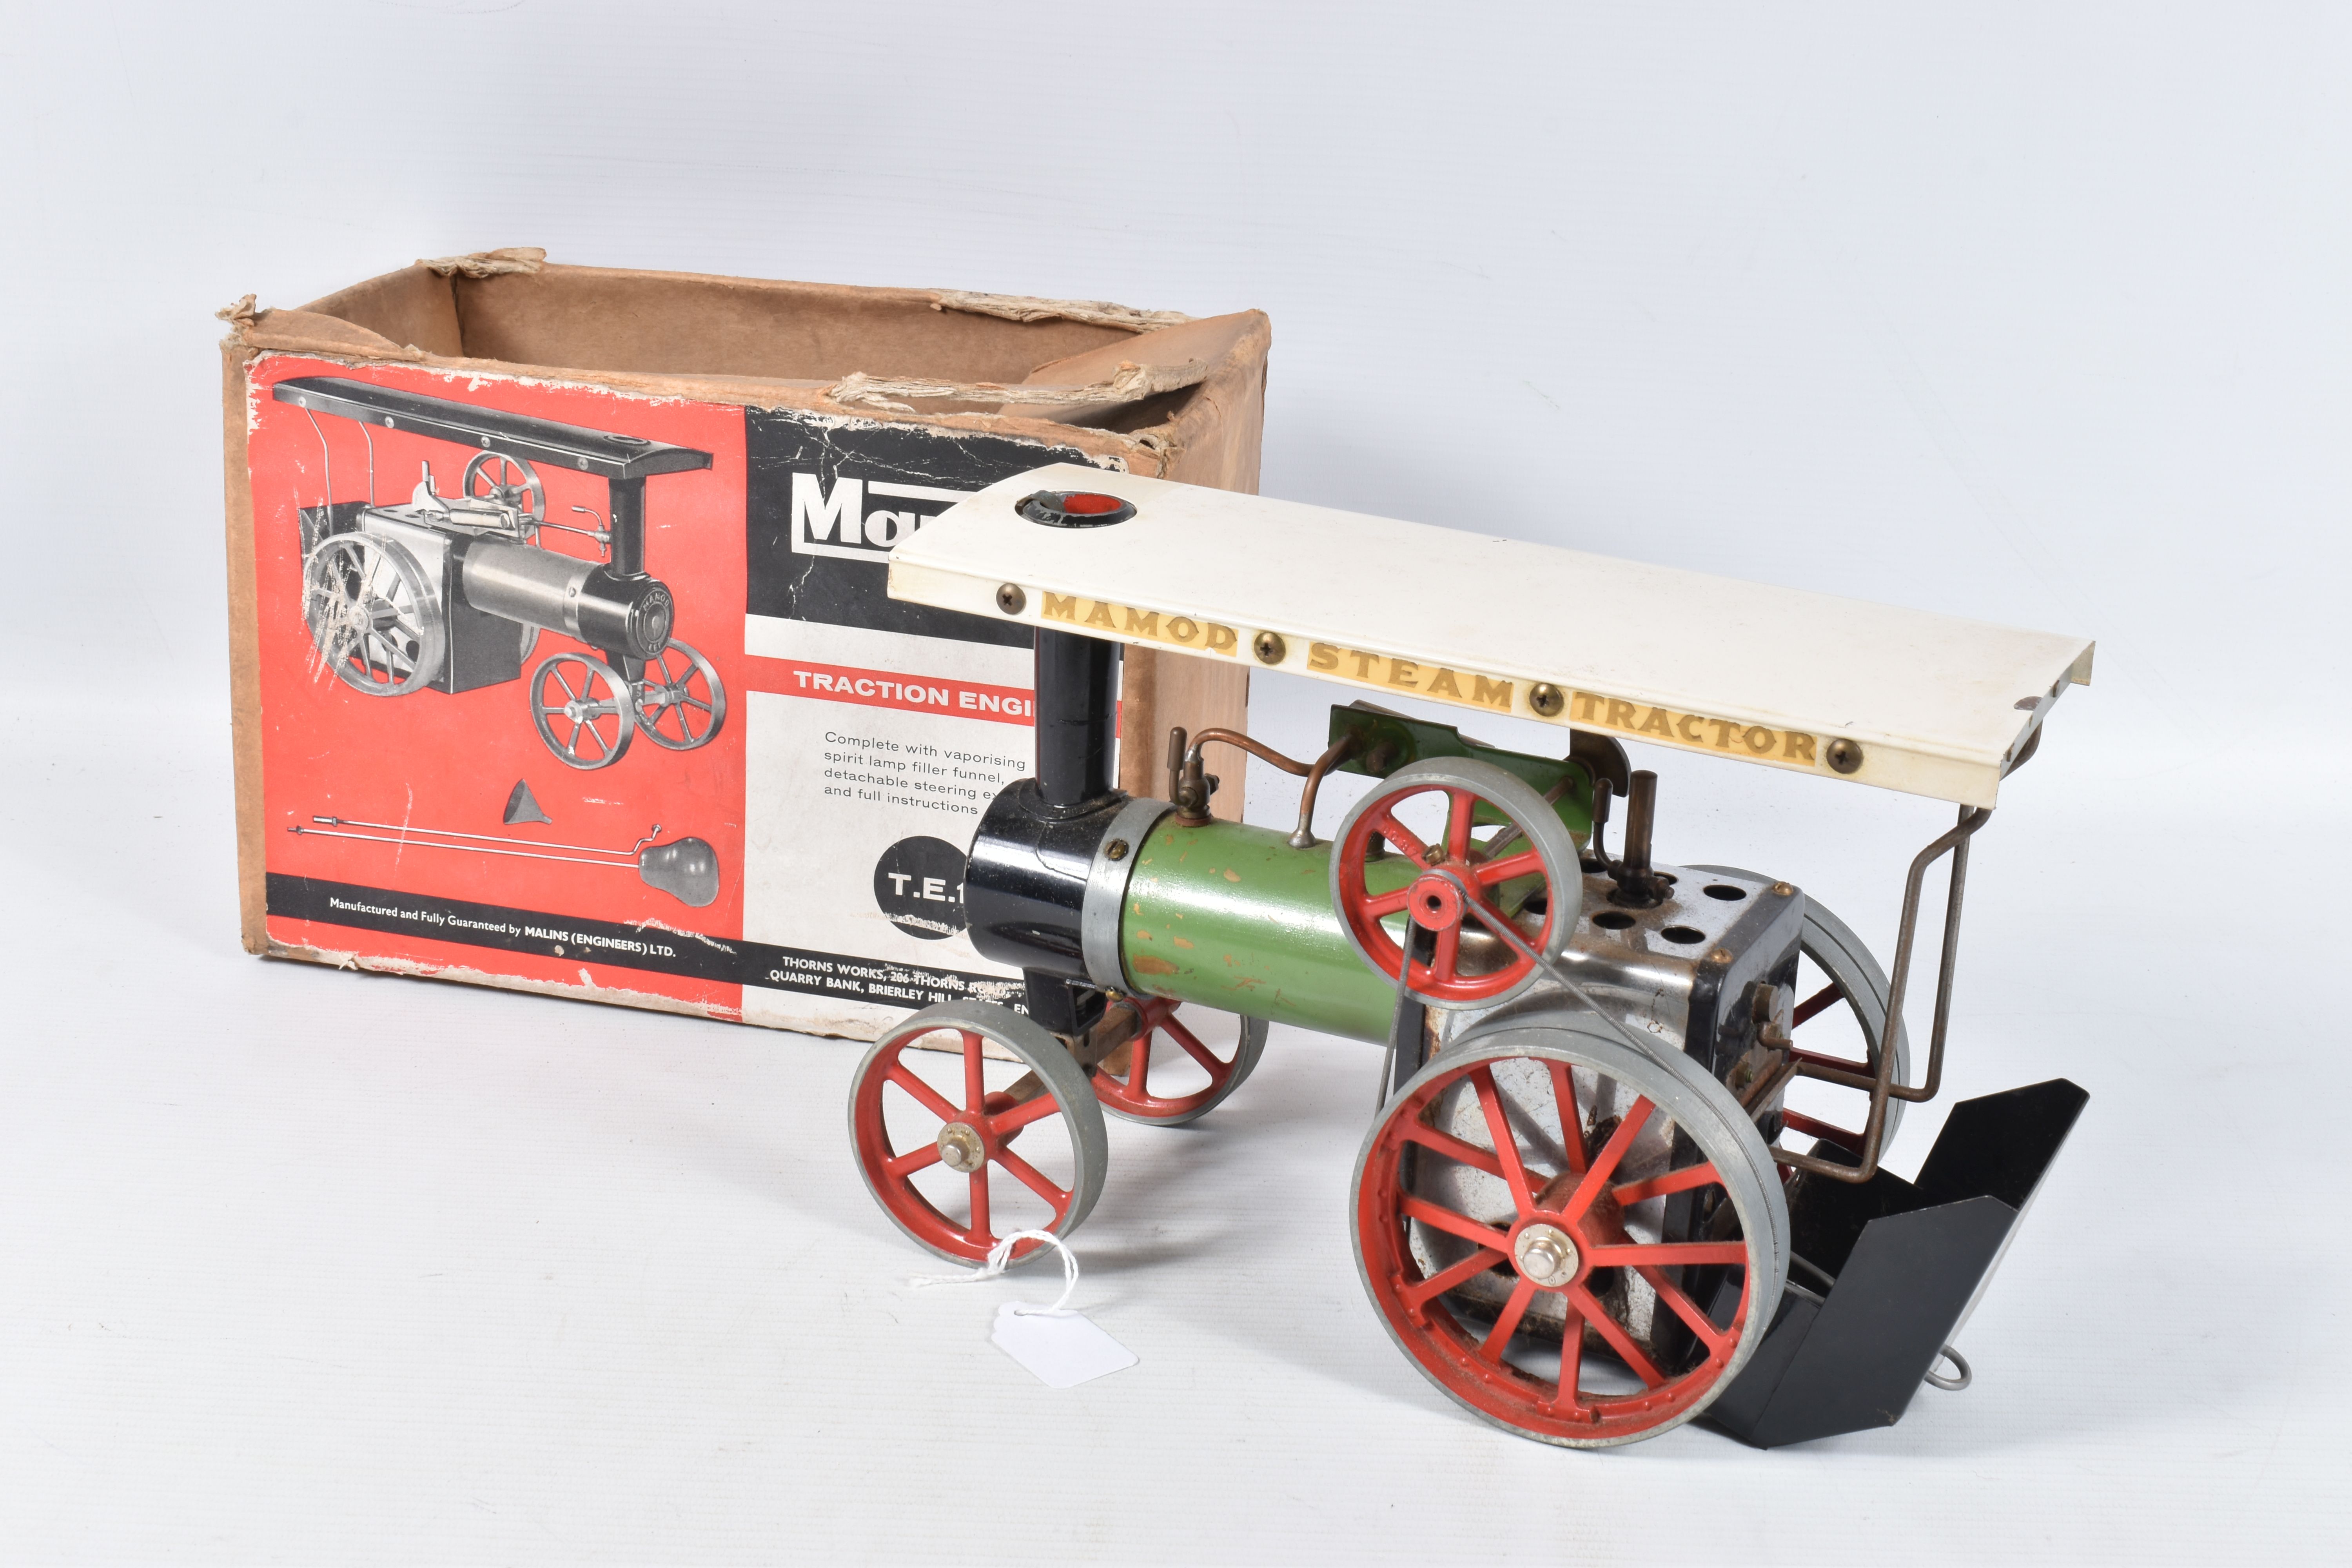 A BOXED MAMOD LIVE STEAM TRACTION ENGINE, No.TE1, not tested, has been fired up but would appear not